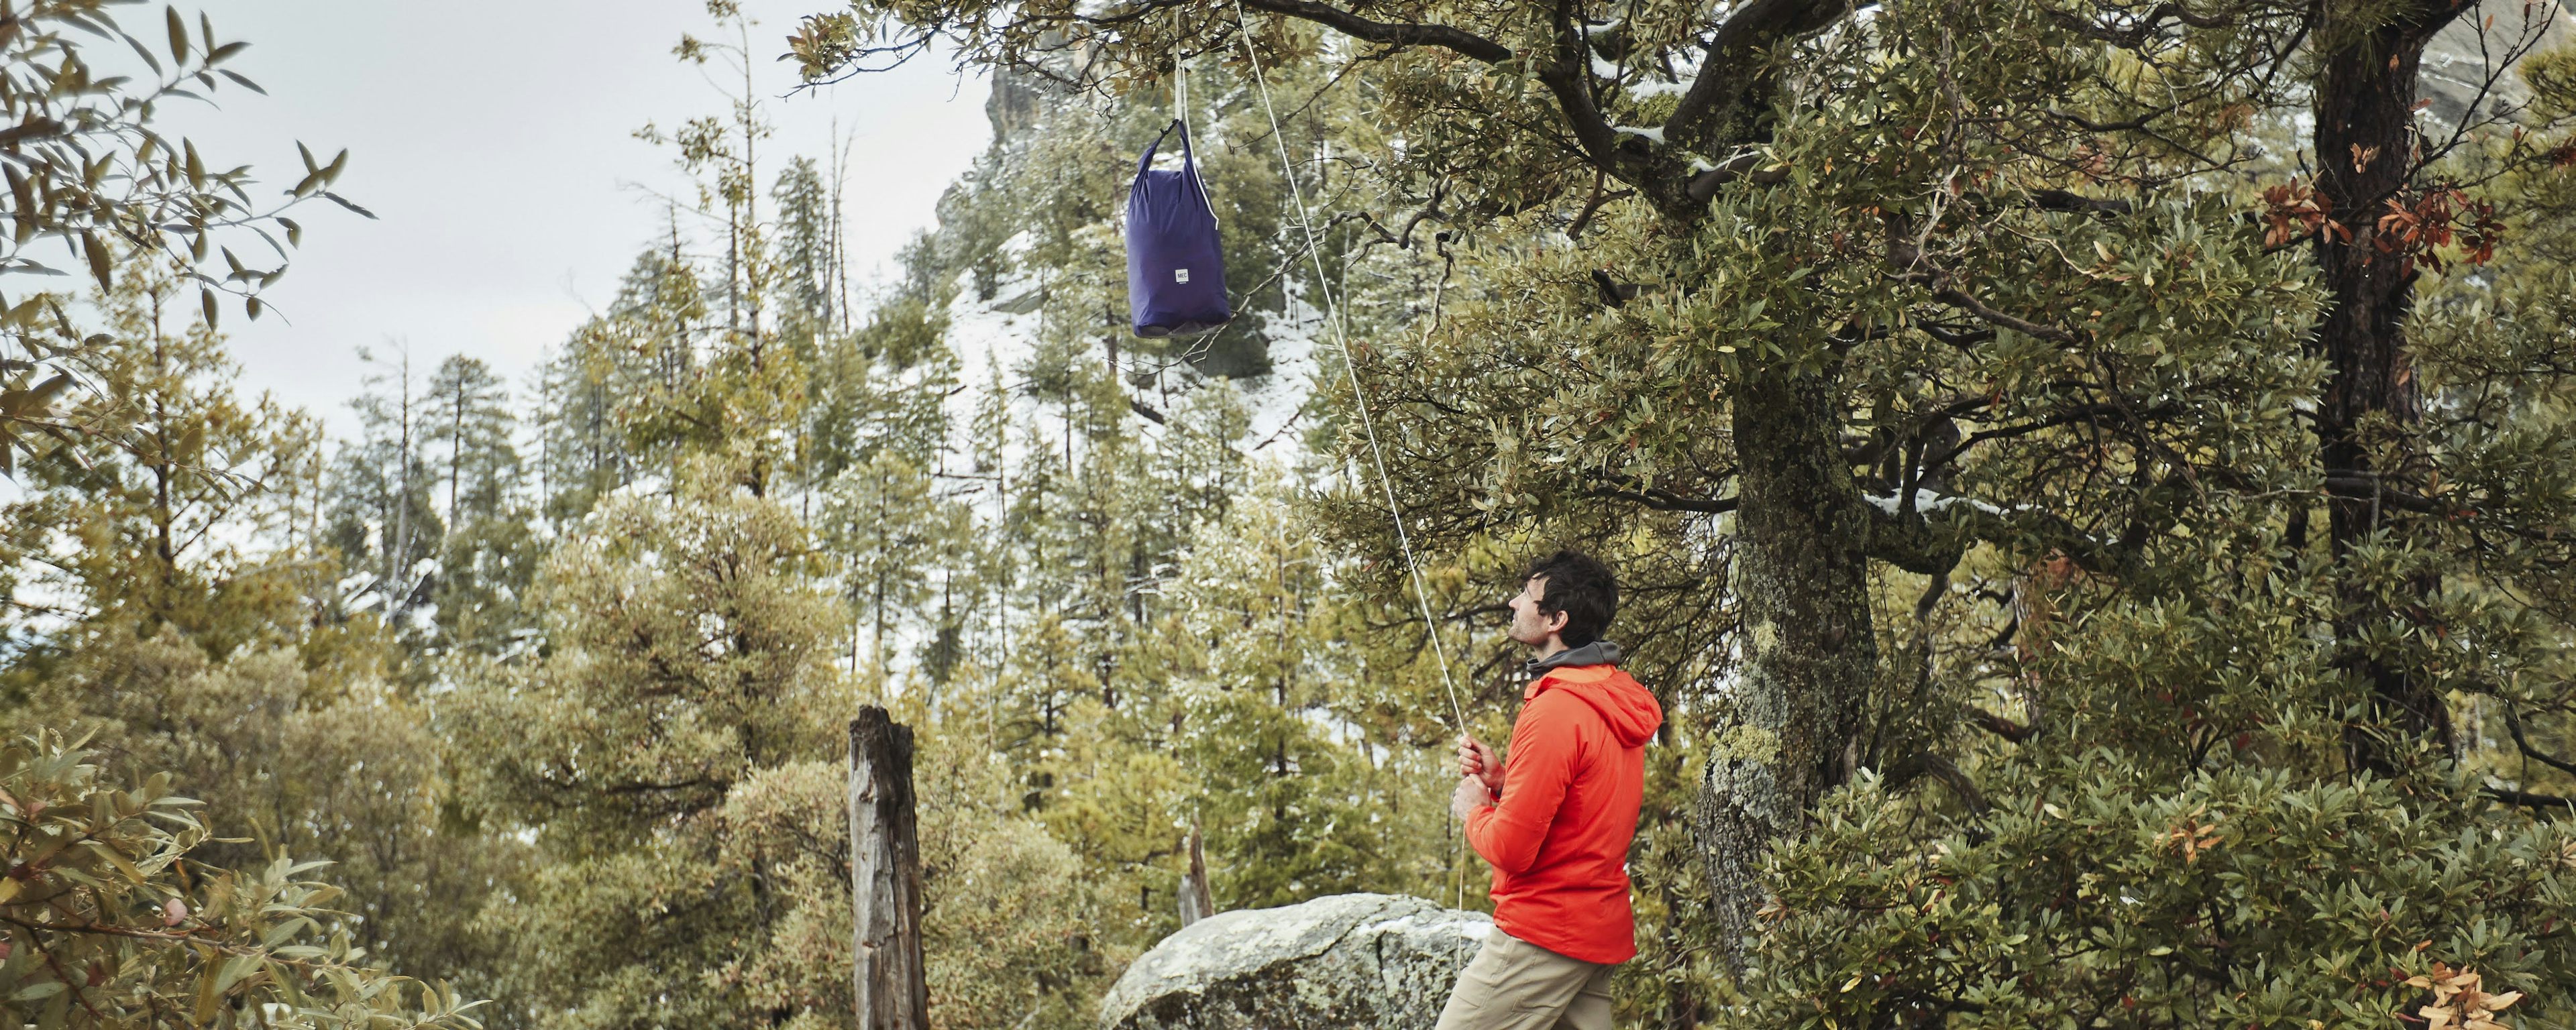 Hiker setting up a bear bag hanging from a tall tree